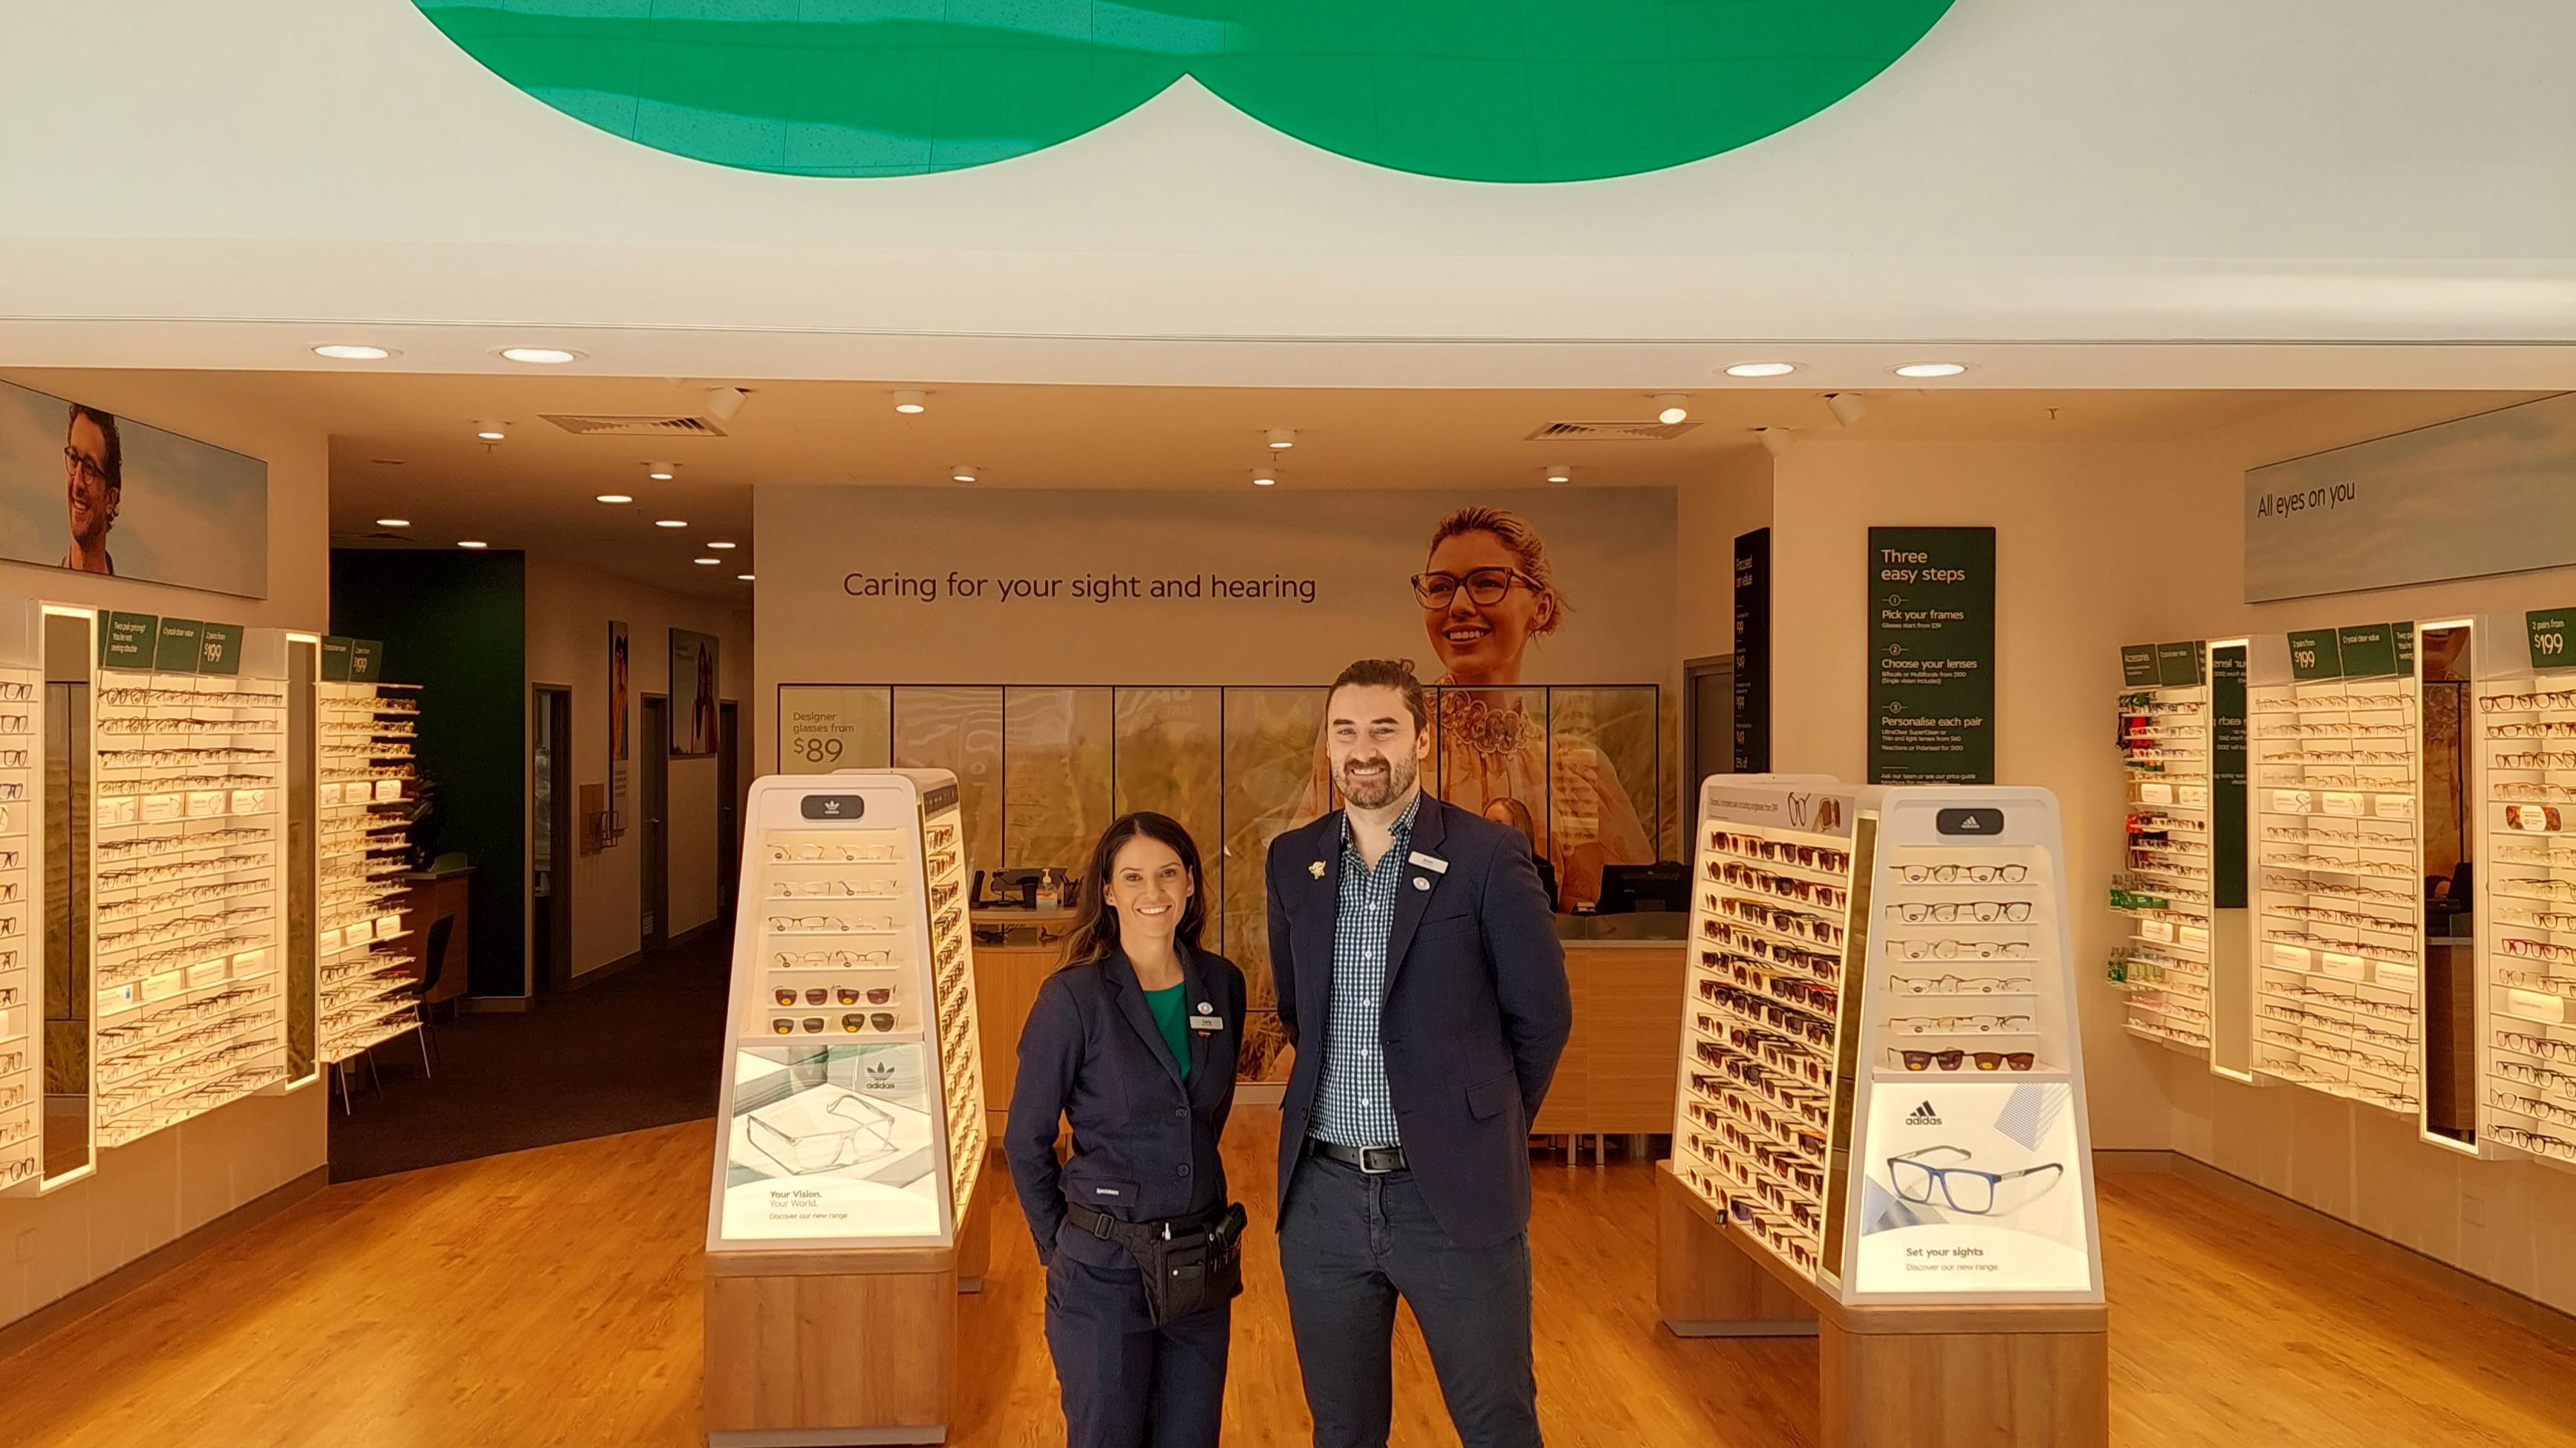 Images Specsavers Optometrists & Audiology - Berri Riverland Central Plaza